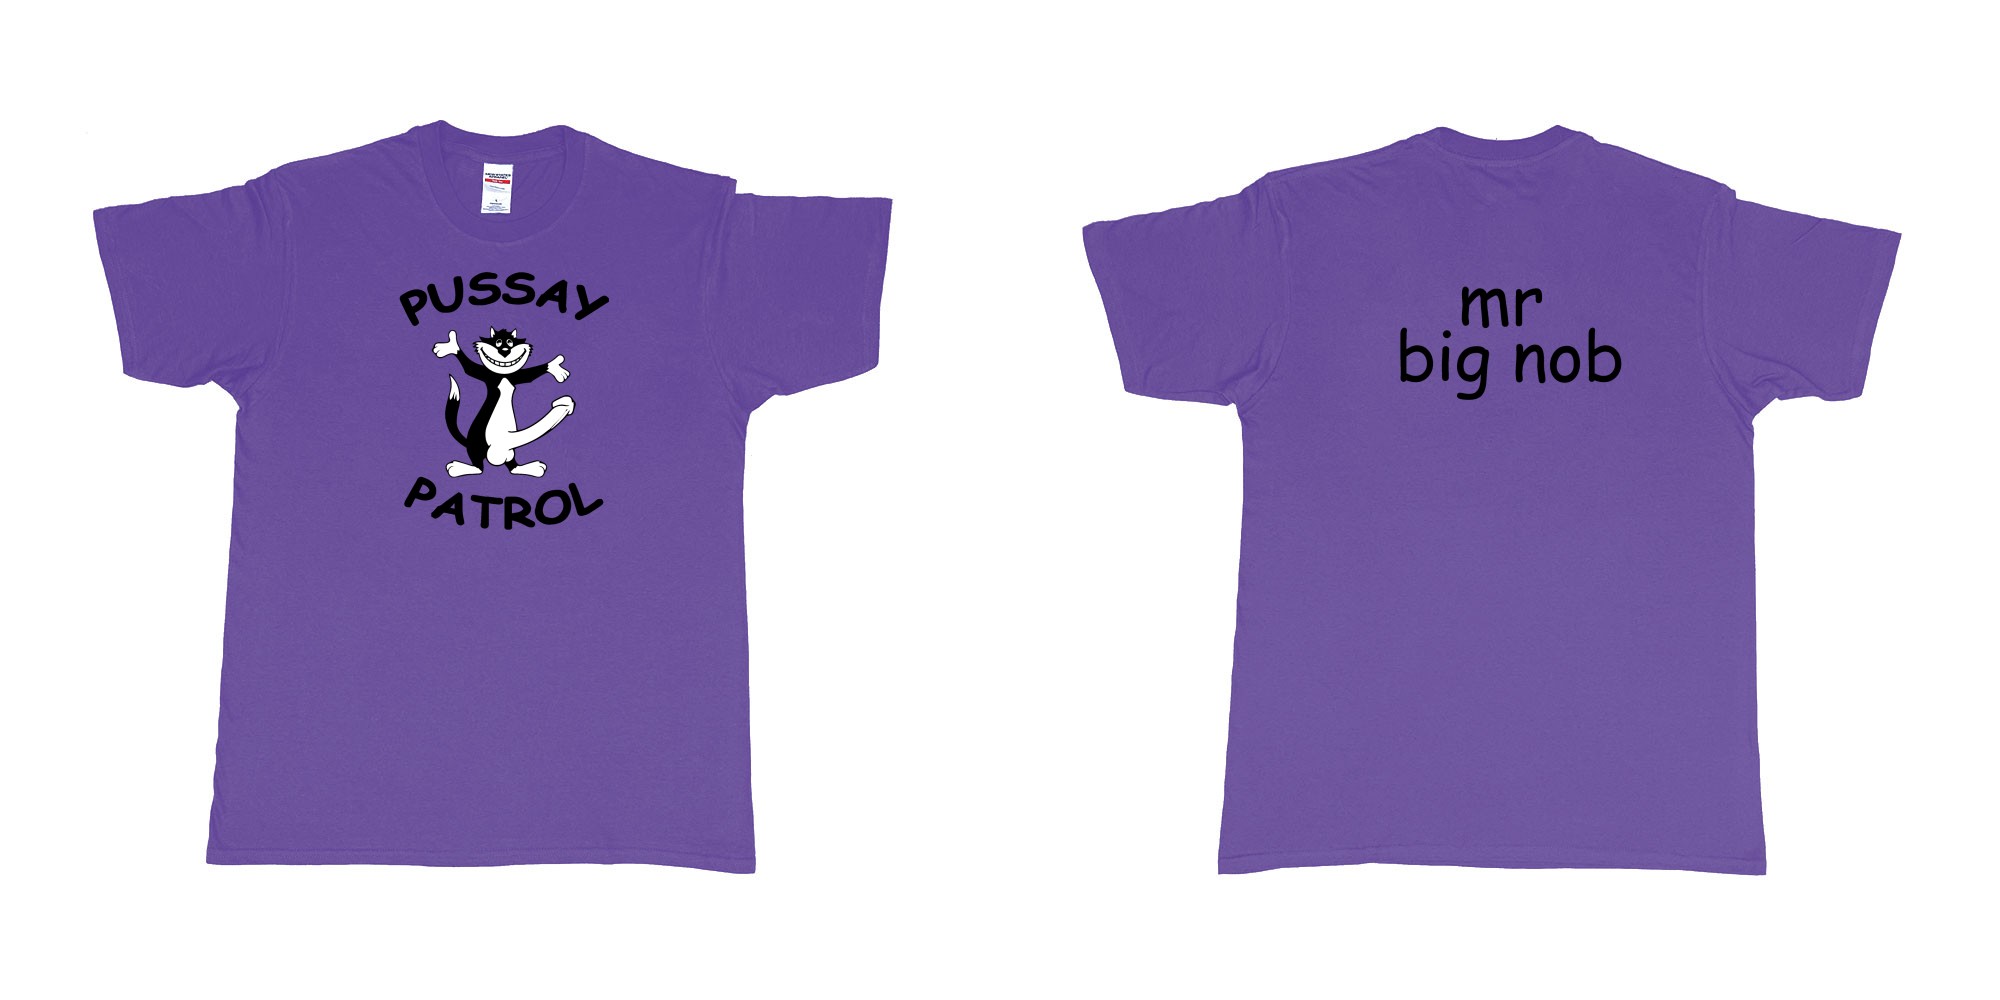 Custom tshirt design TPW Pussay Patrol in fabric color purple choice your own text made in Bali by The Pirate Way